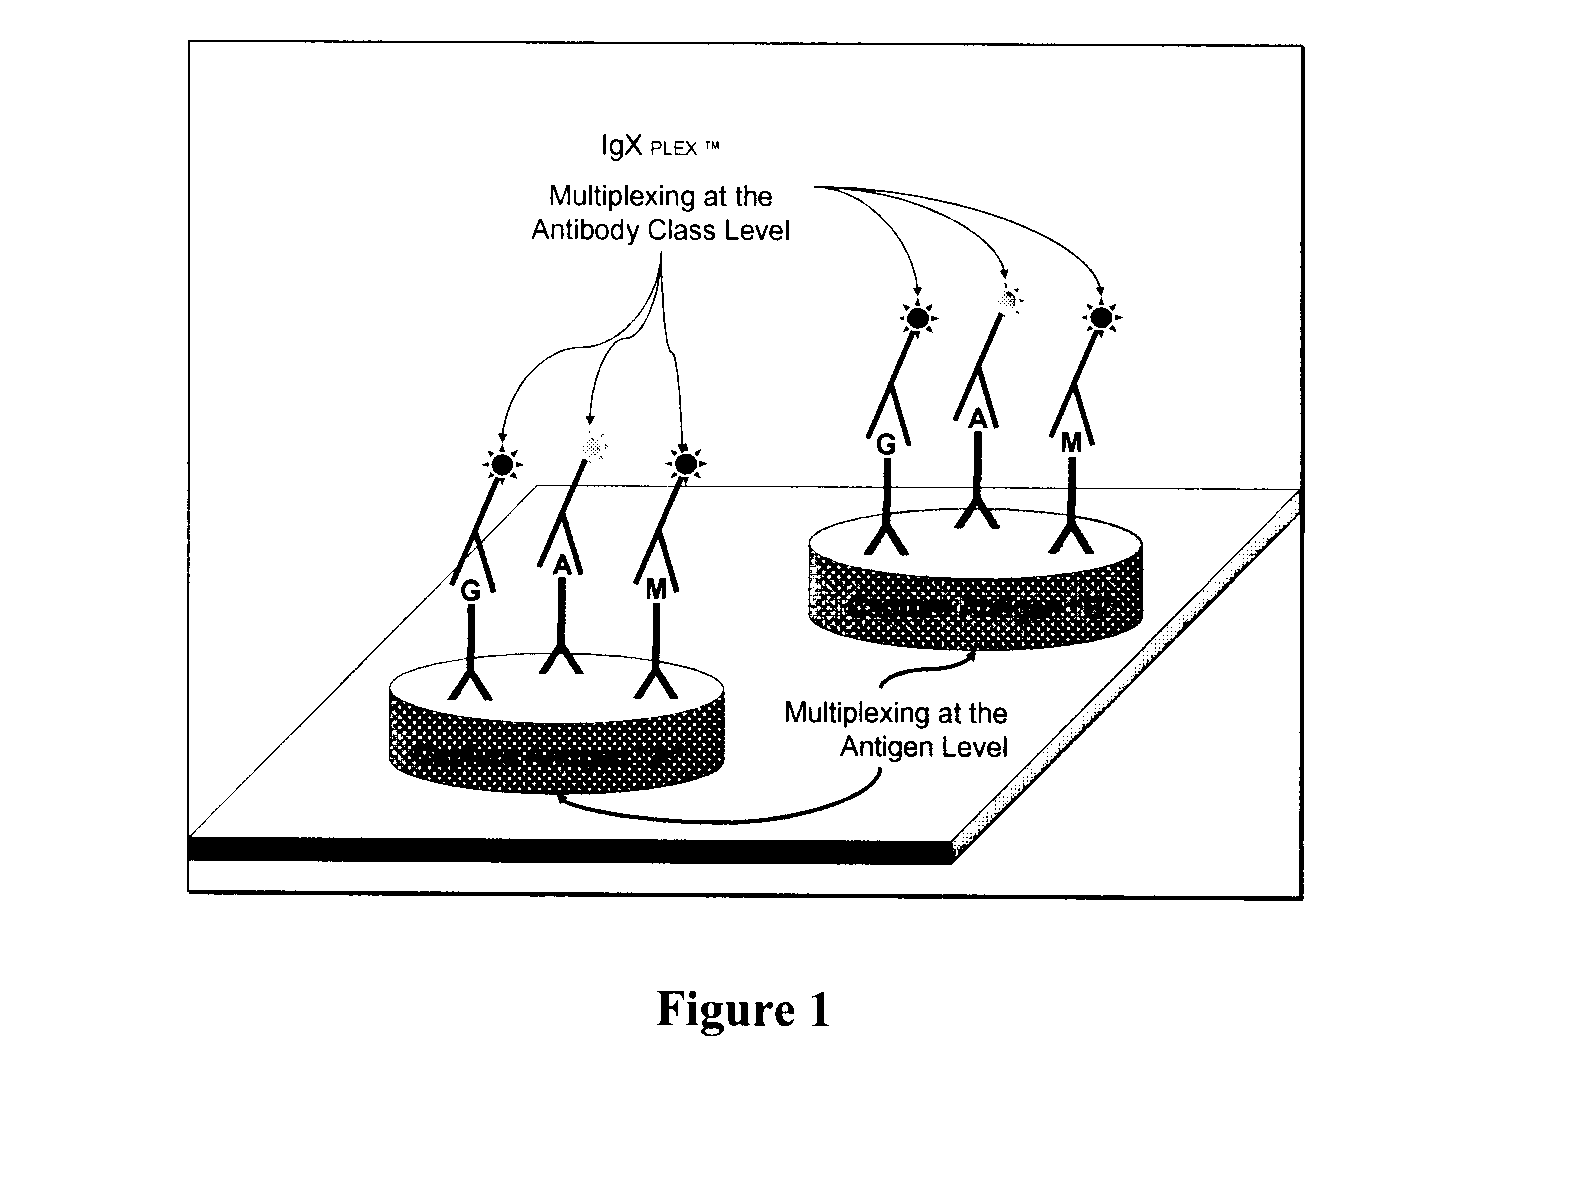 Methods for multiplex analyte detection and quantification